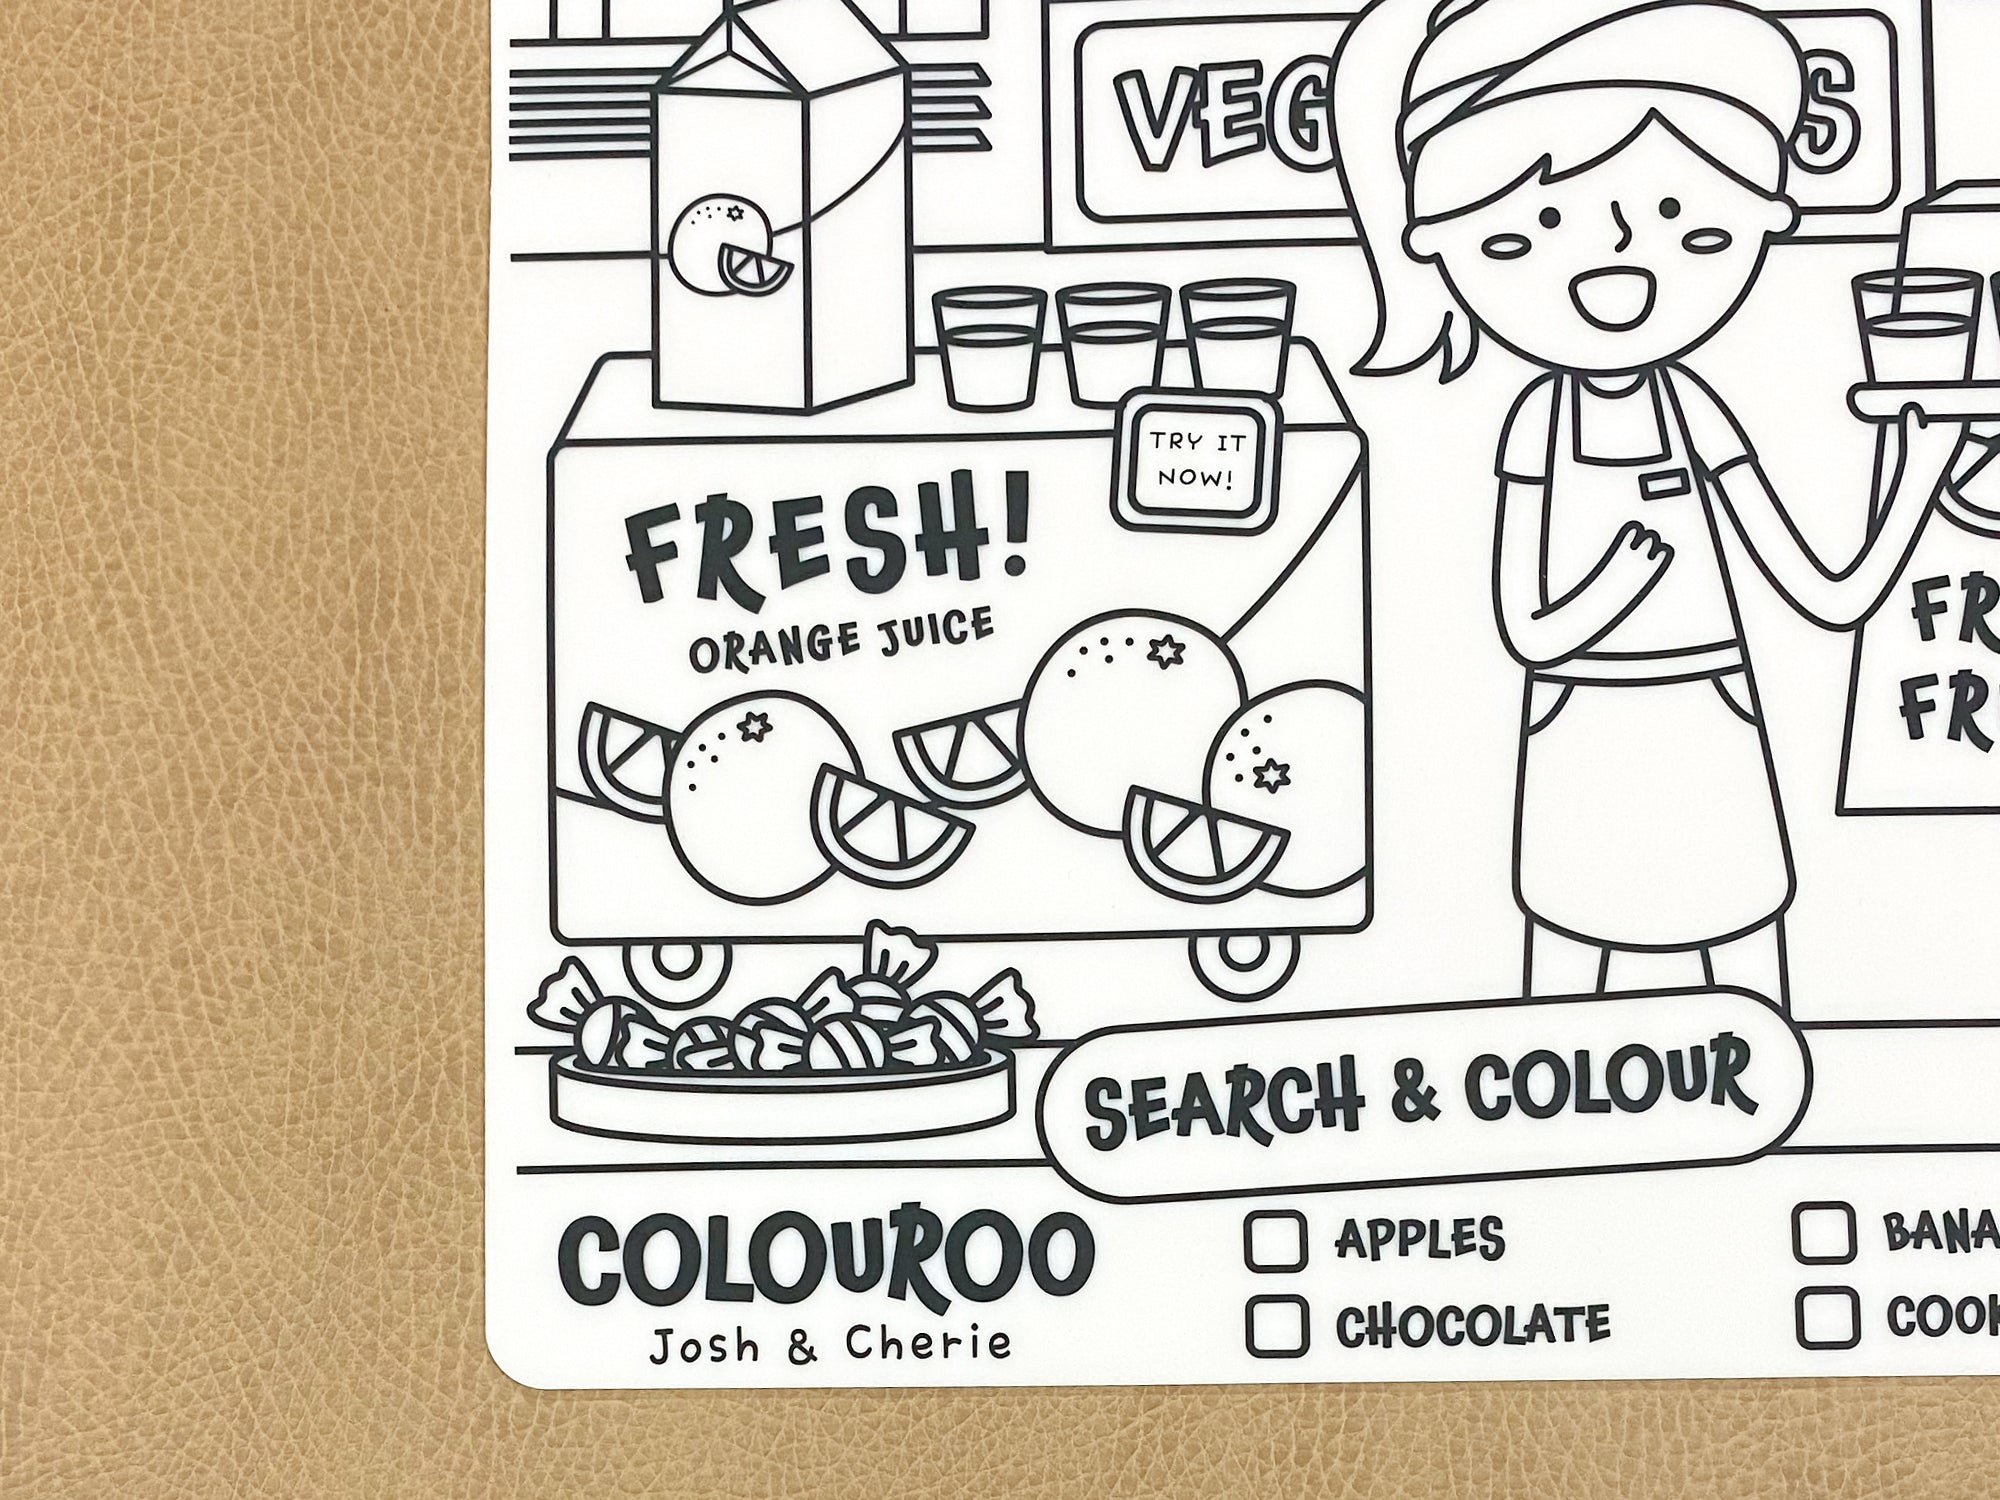 Grocery Store: Search & Colour Mat